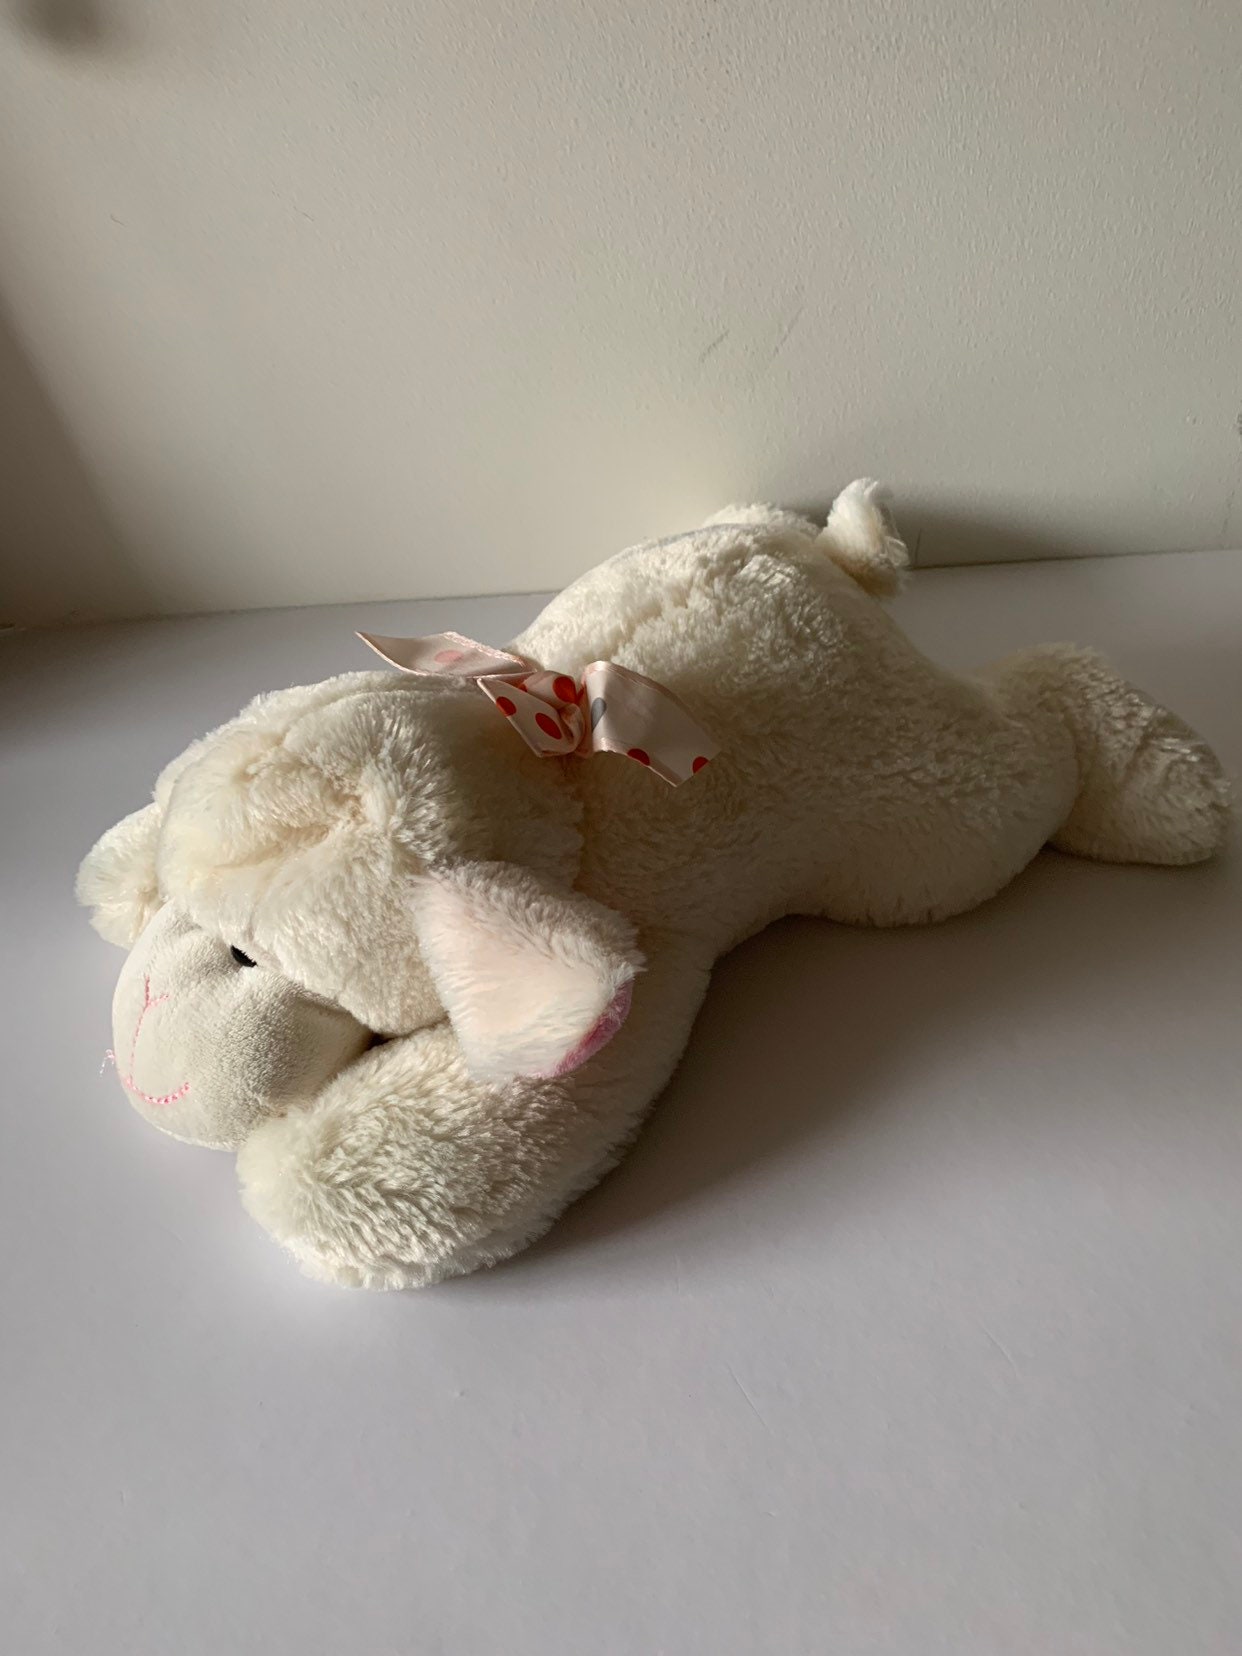 washable weighted buddy lamb 3 1//2 lbs Weighted stuffed animal